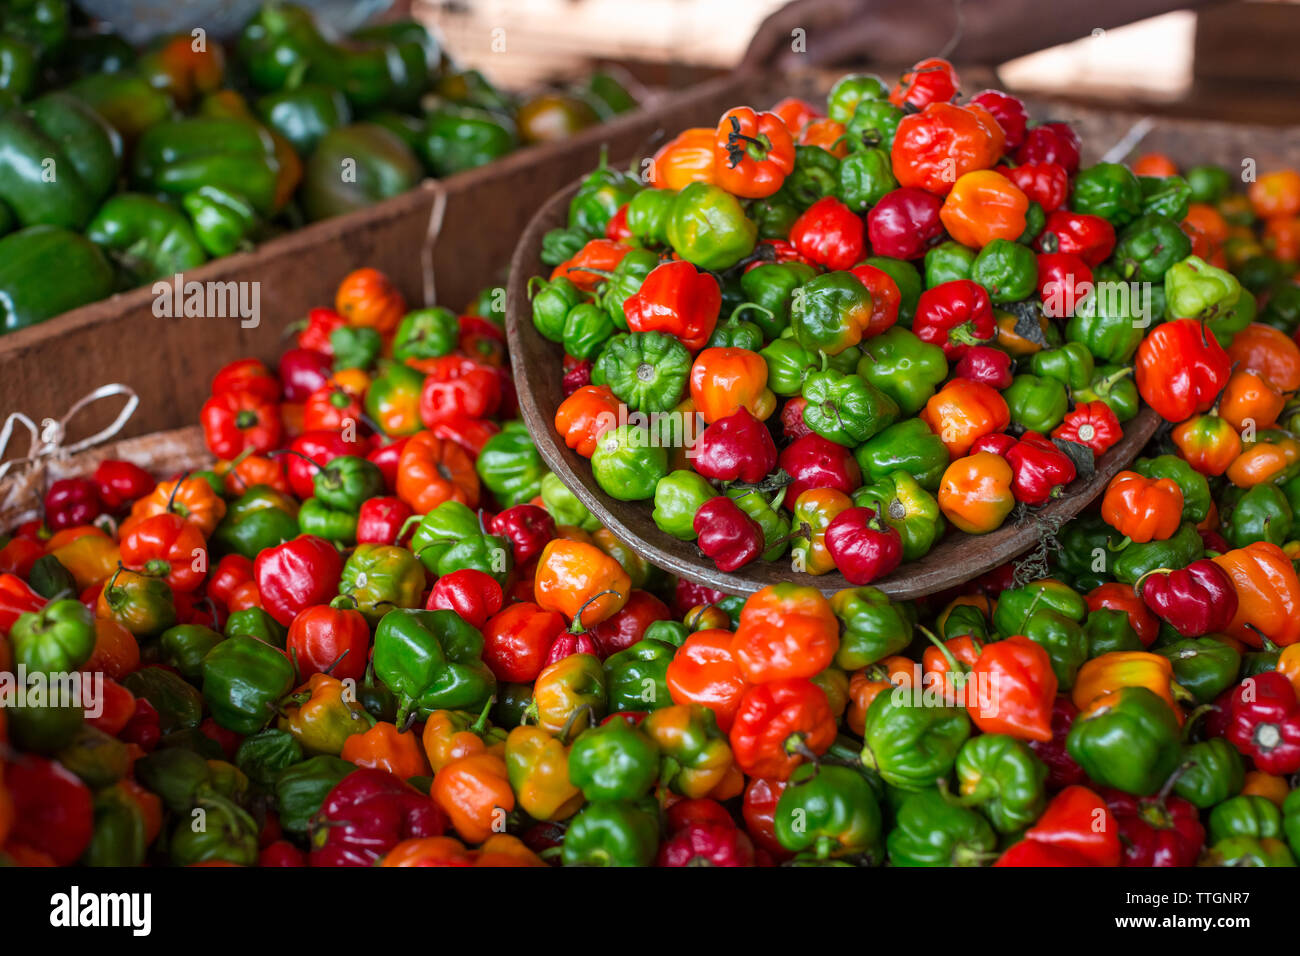 where to buy scotch bonnet peppers in brooklyn